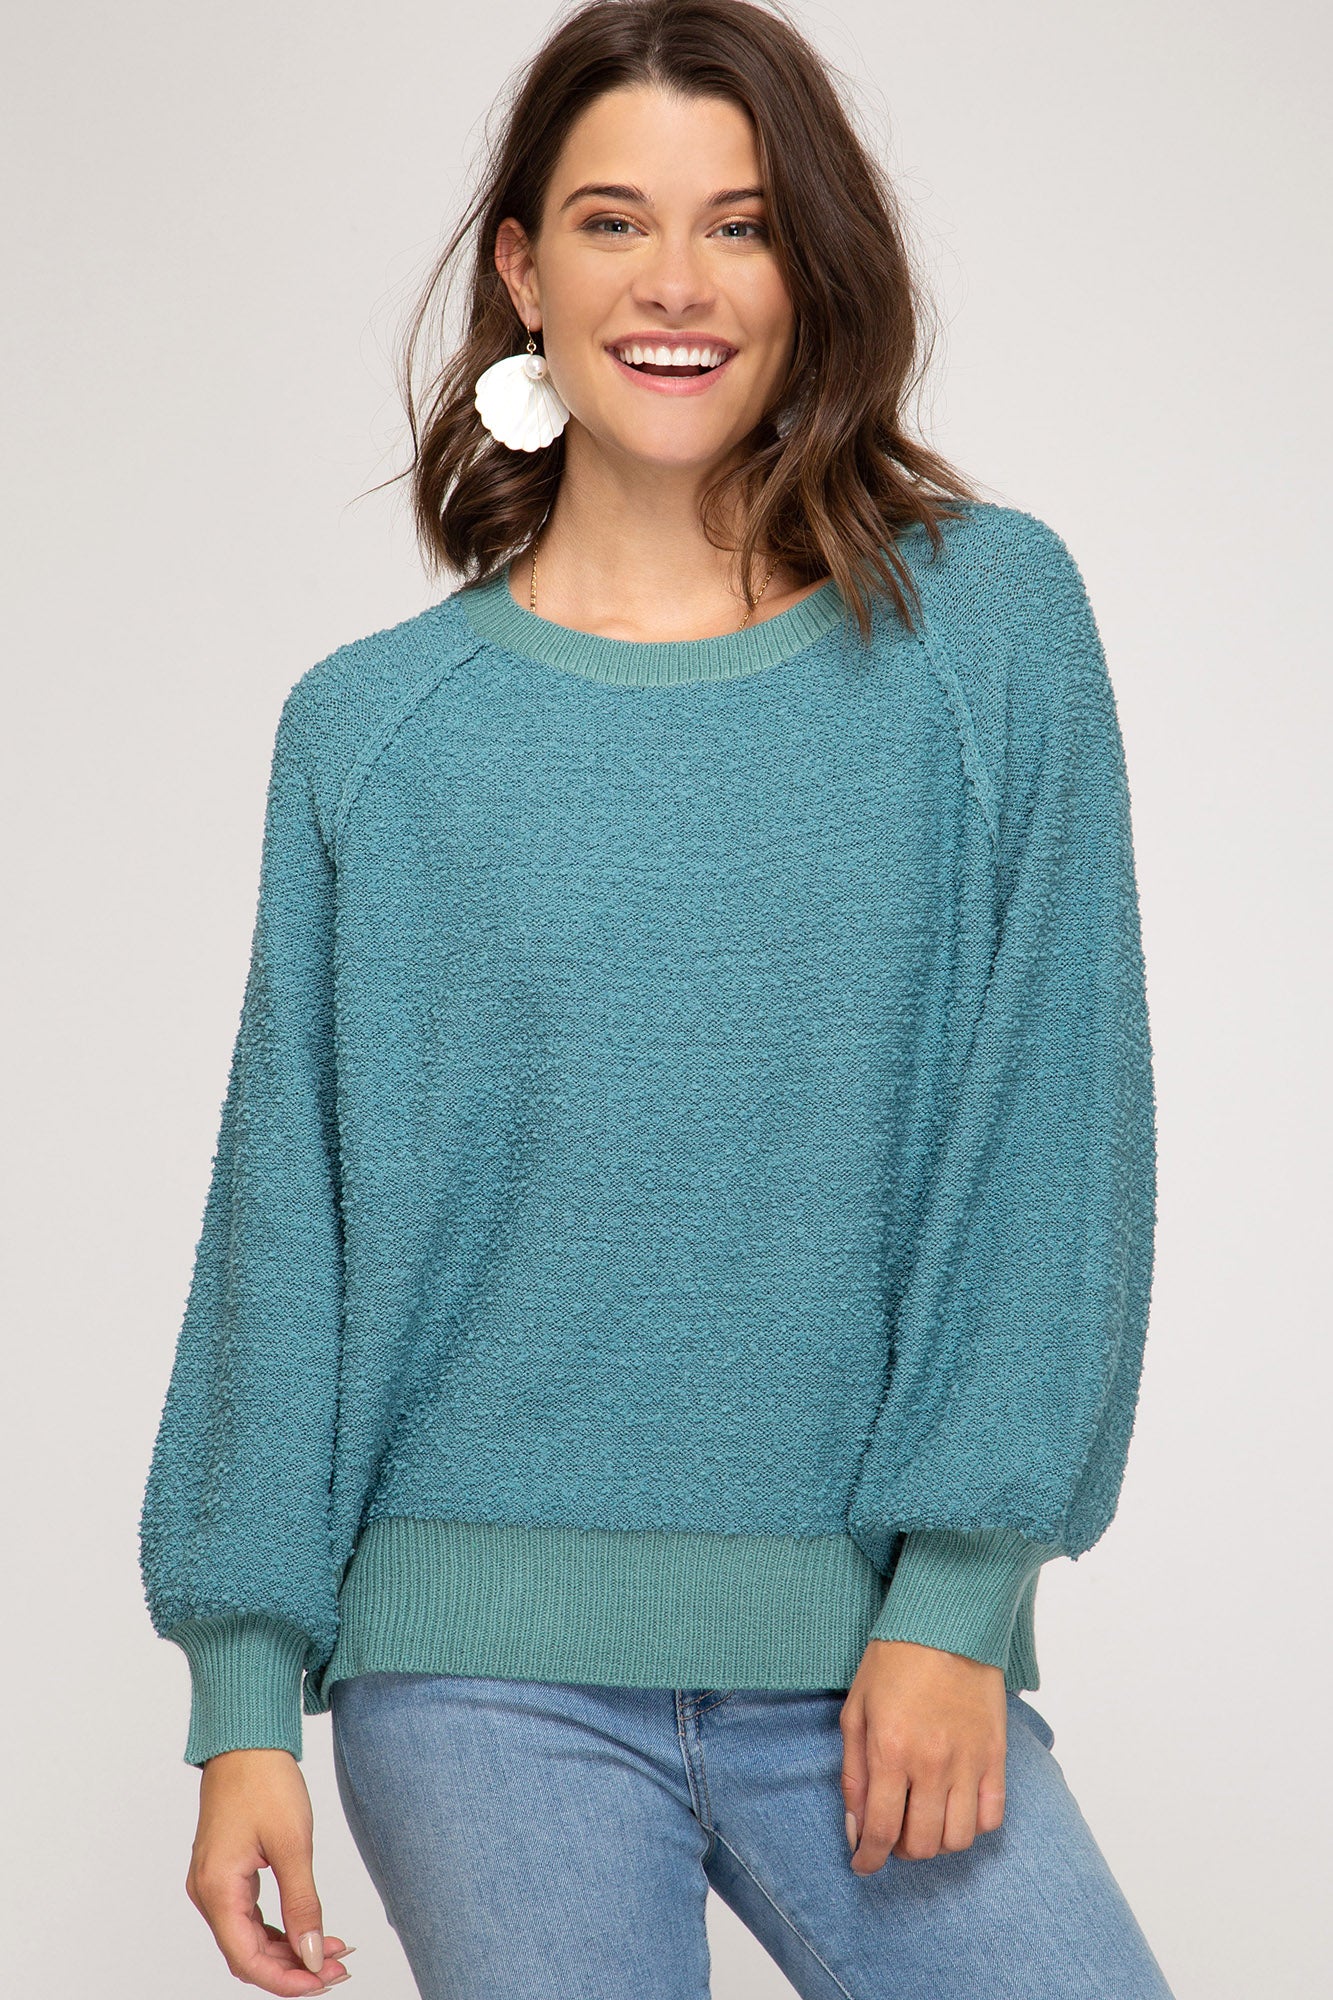 Long Sleeve Fluffy Knit Sweater Top!